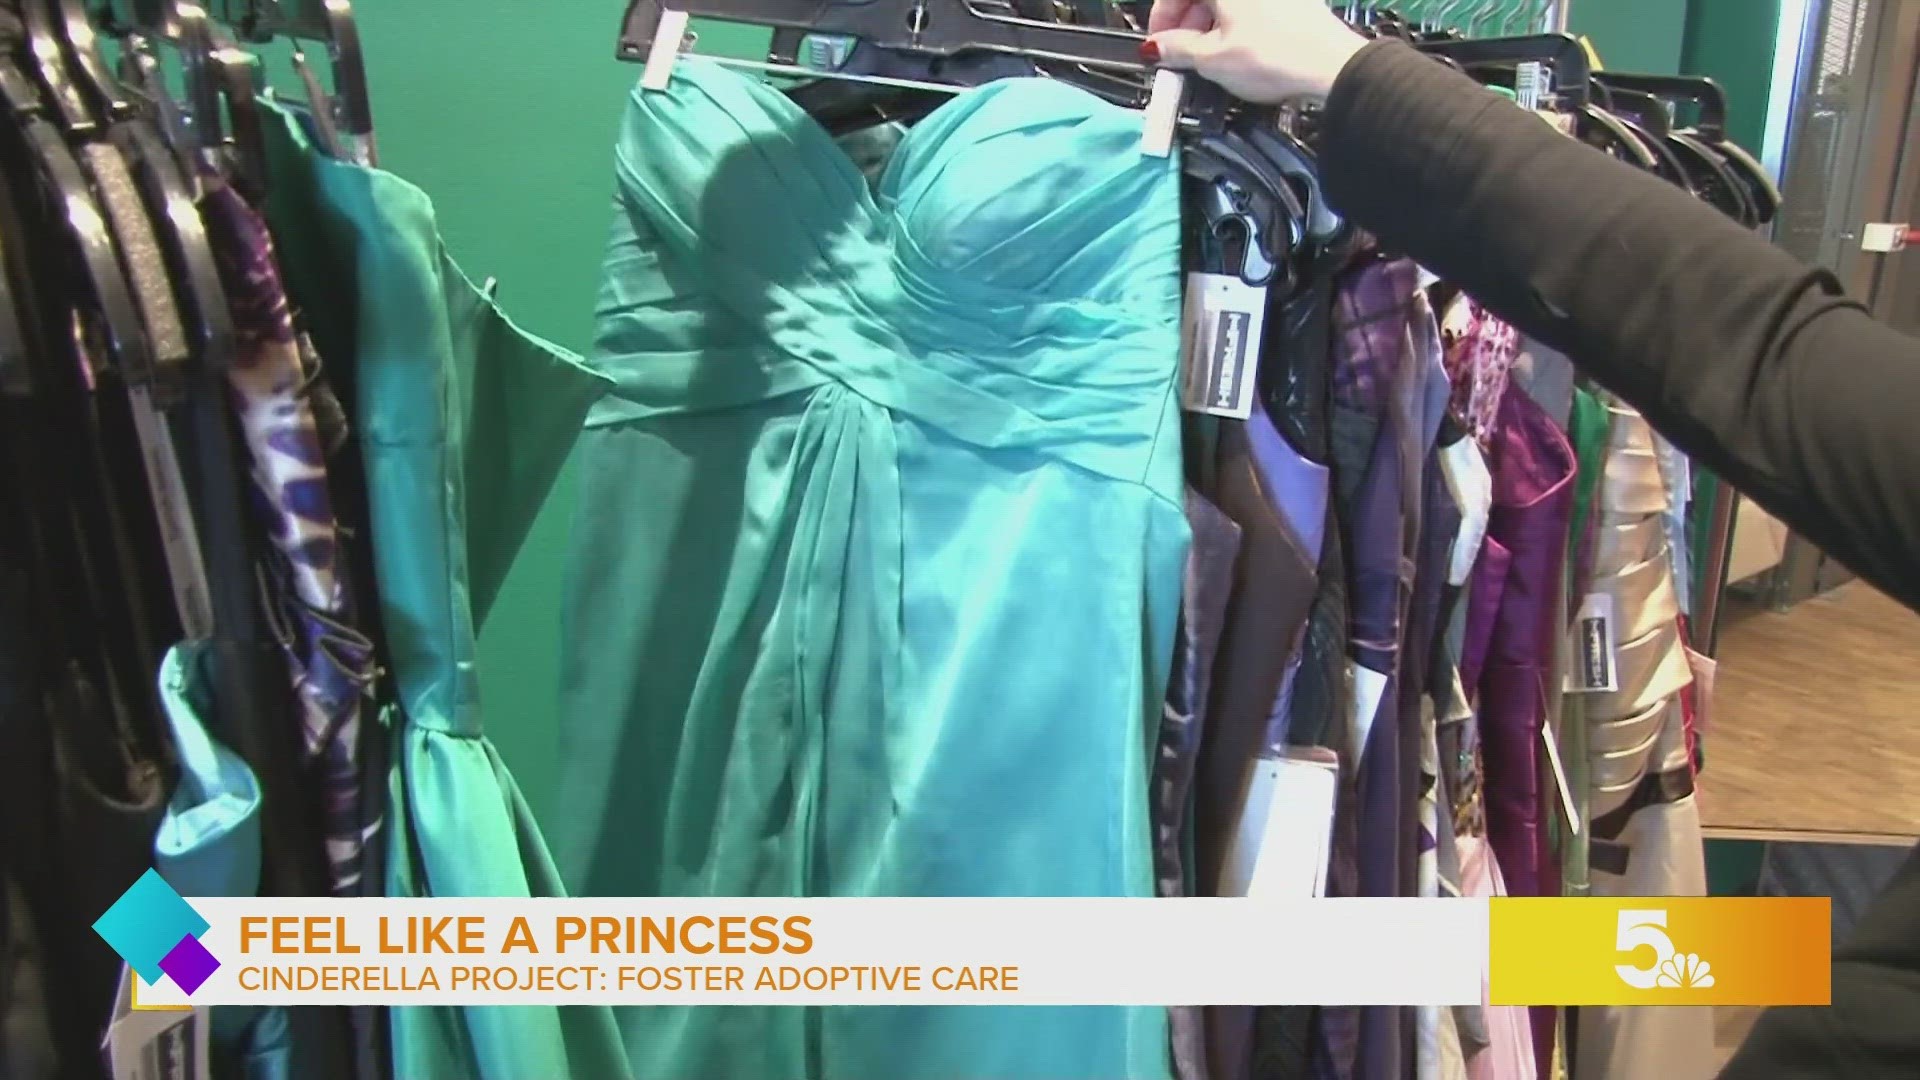 You can help make prom dreams come true by bringing new and gently-used prom dresses to any of the Cinderella Project drop-off locations.